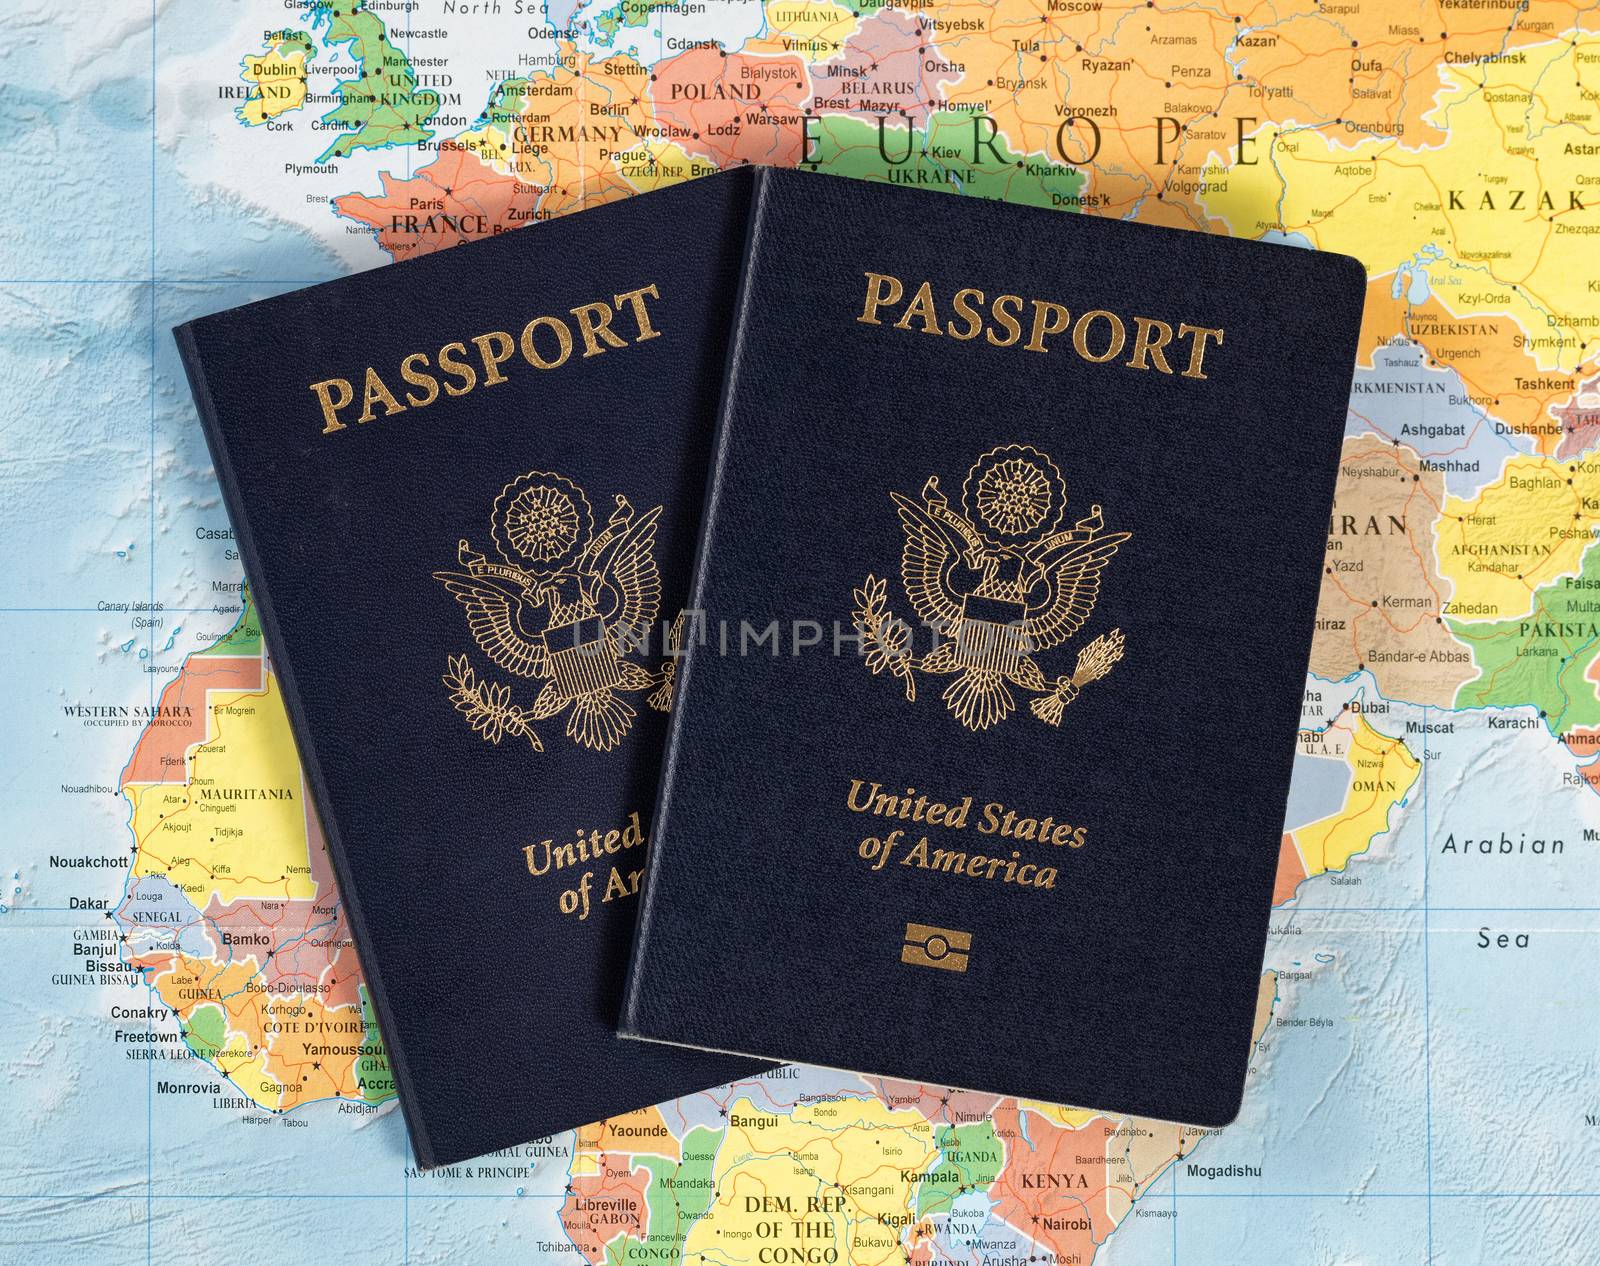 USA passport books for travelling the world  by tab1962